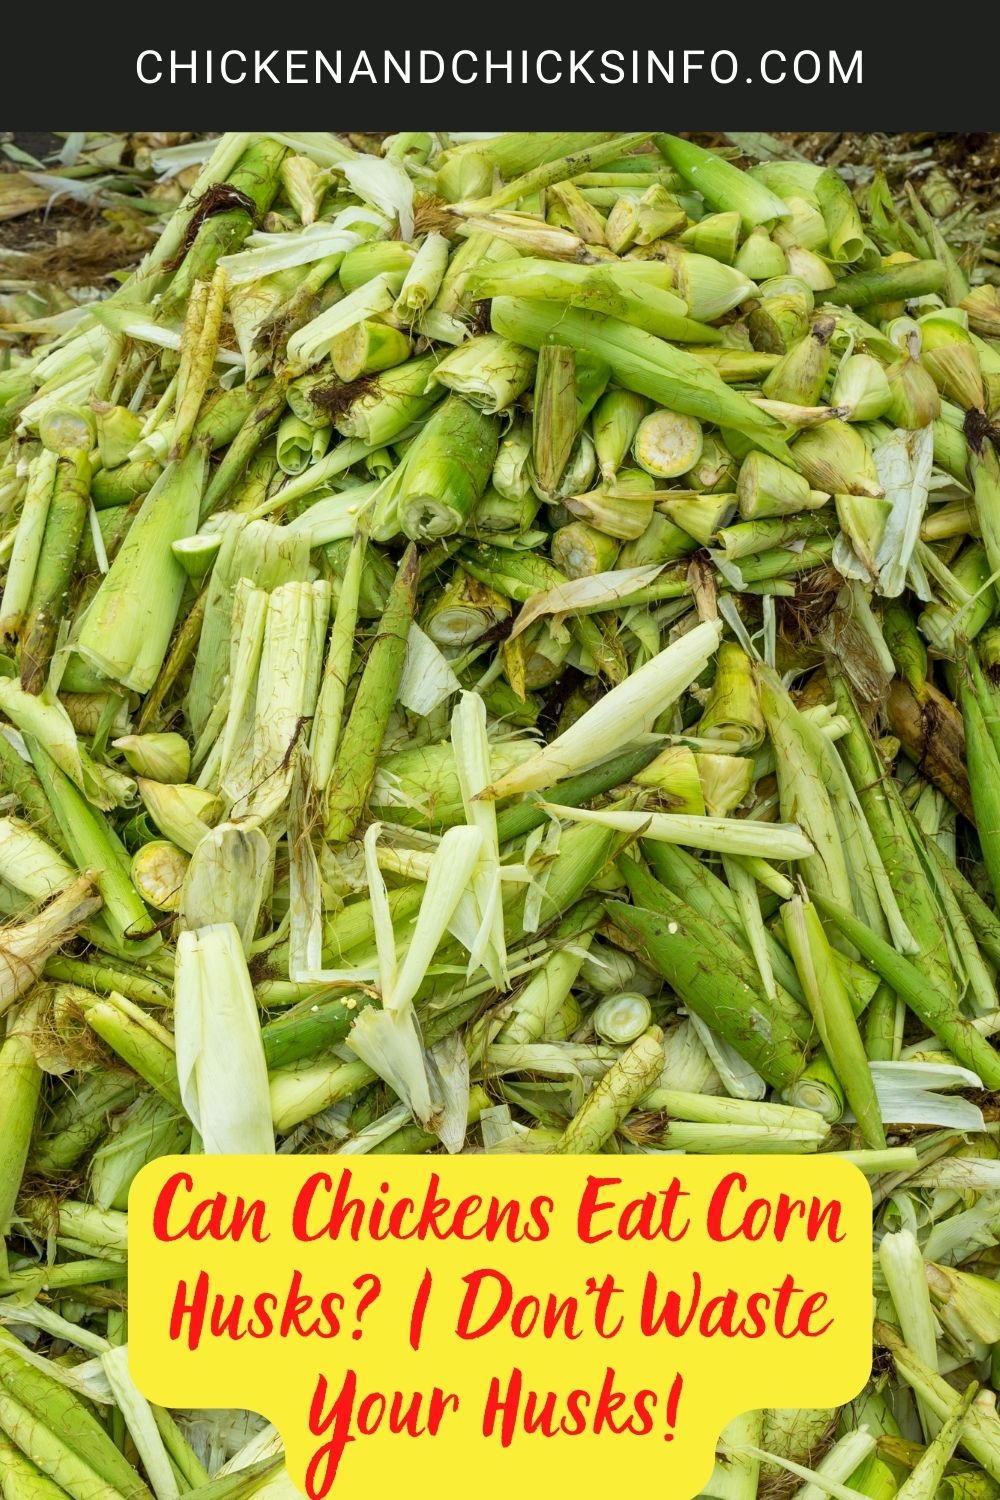 Can Chickens Eat Corn Husks? | Don't Waste Your Husks! poster.
